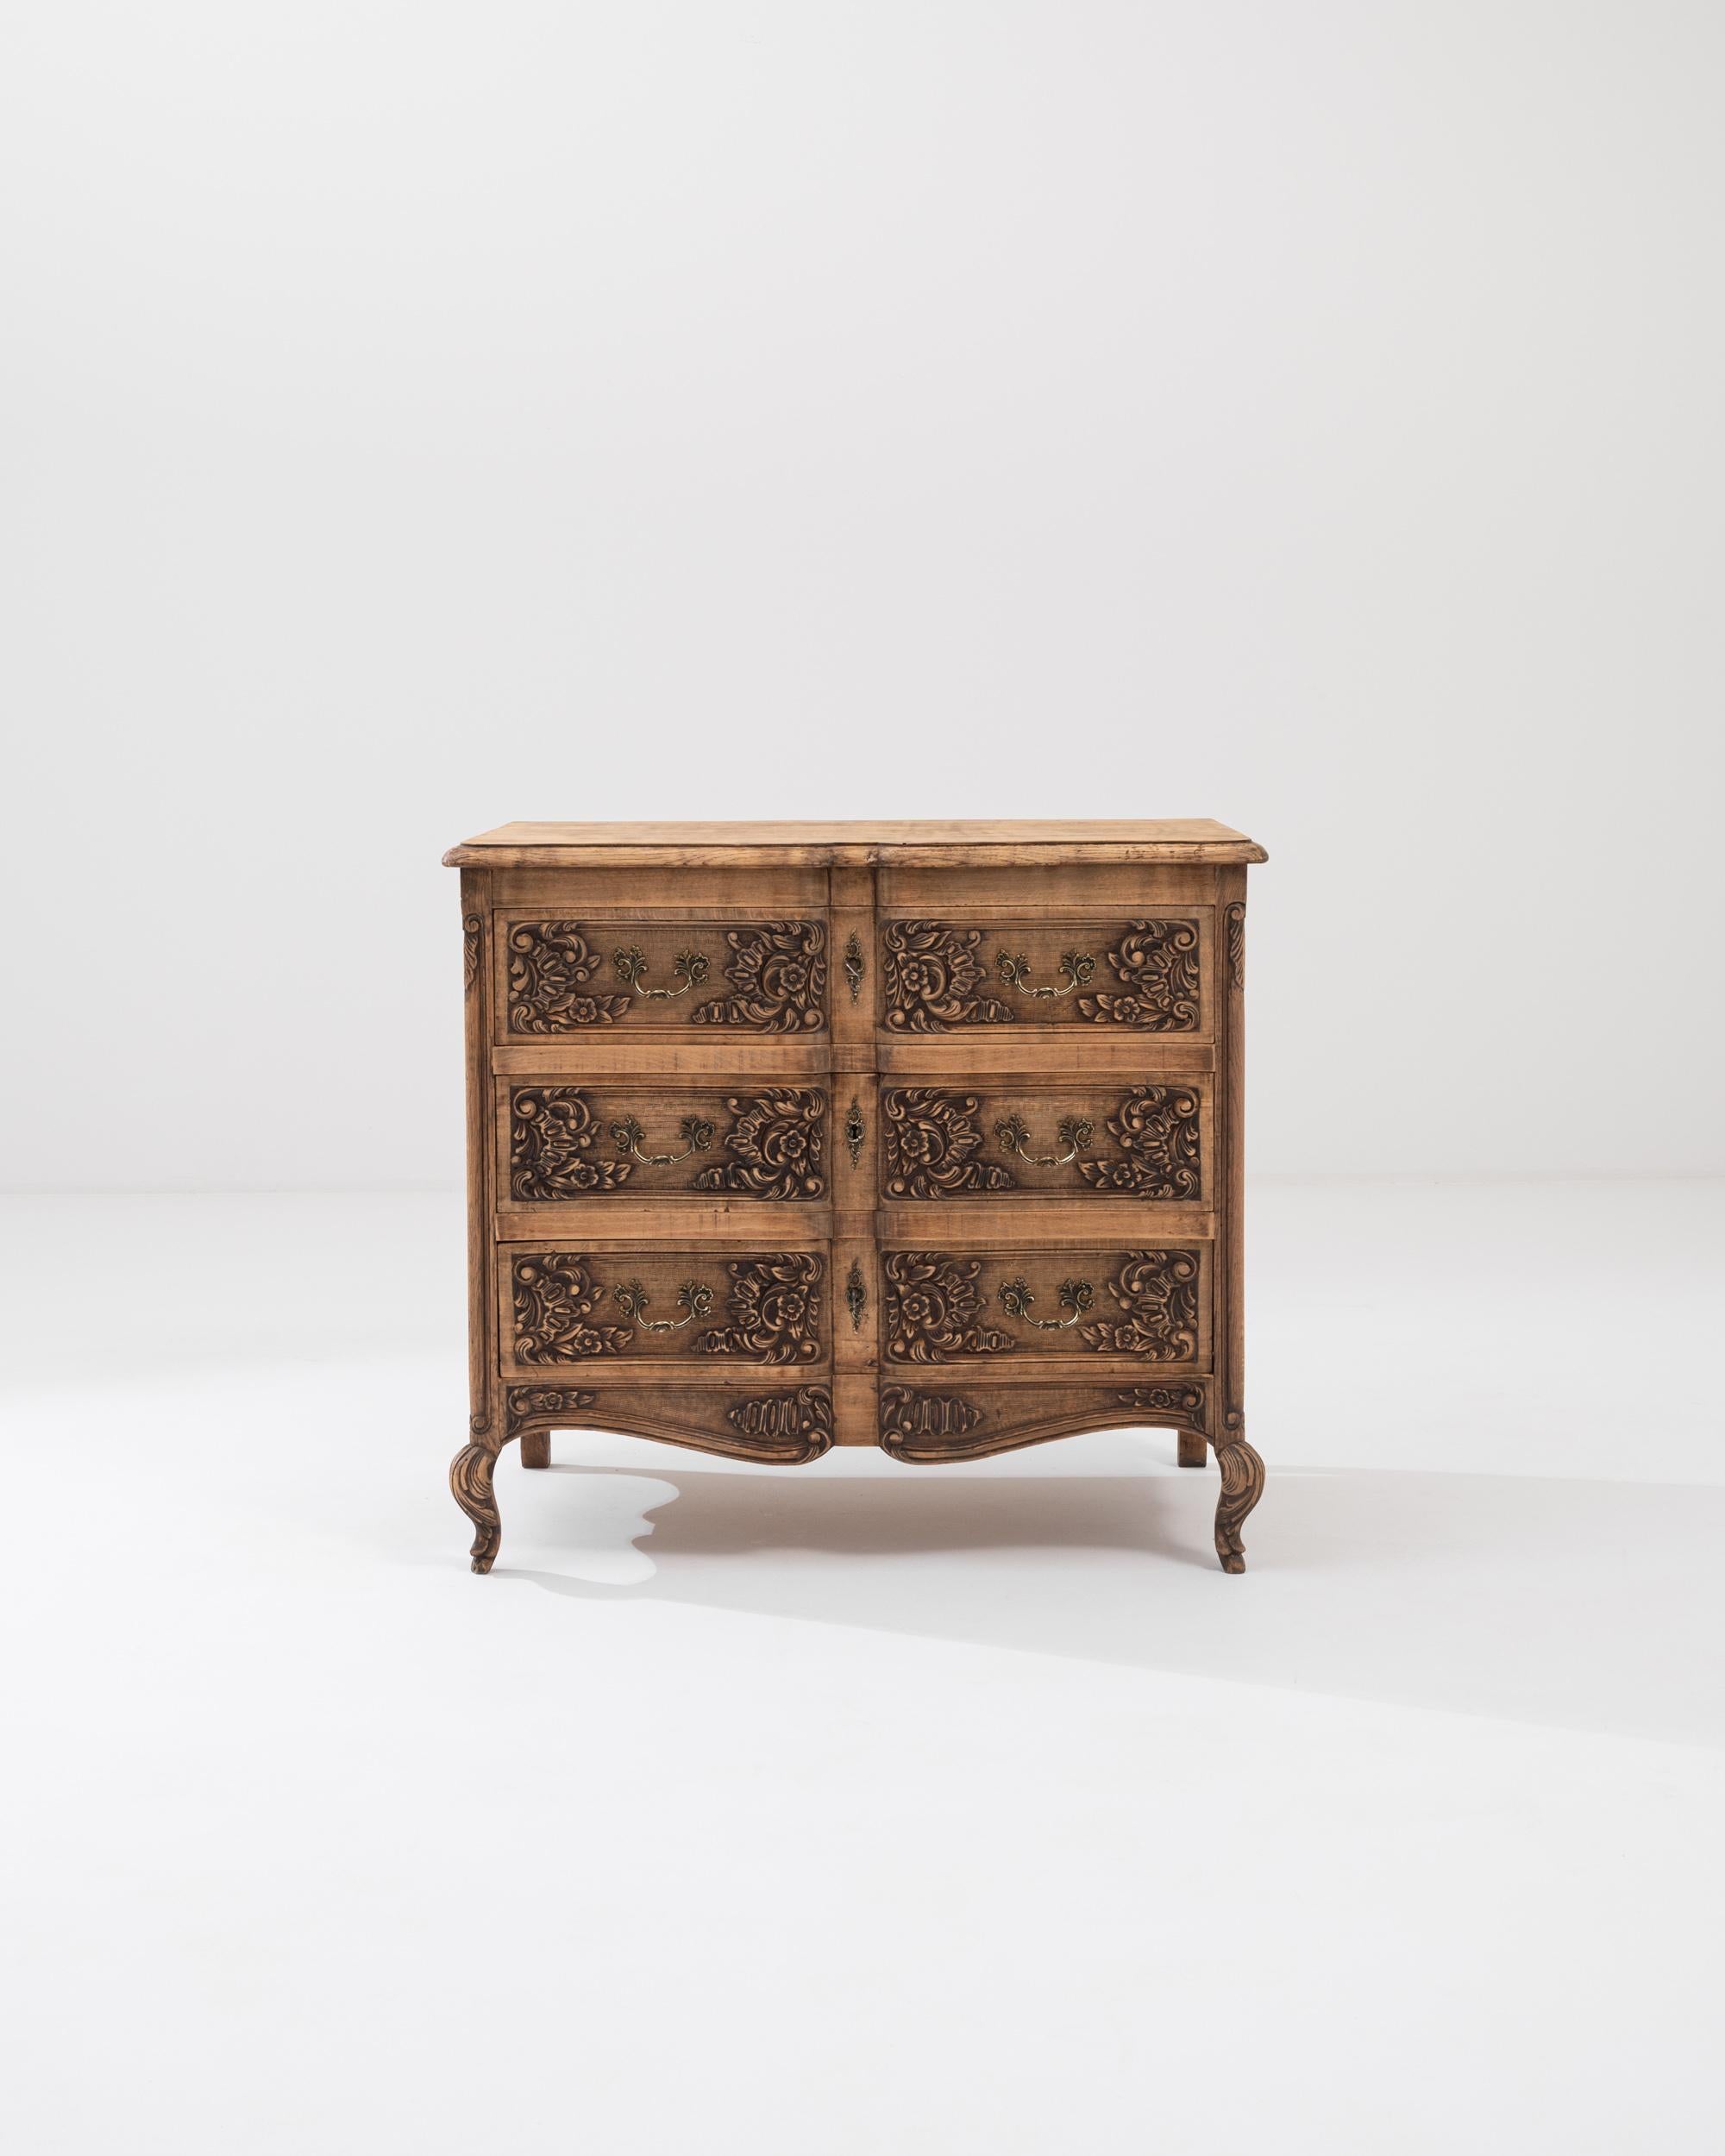 A wooden chest of drawers from 20th century Belgium. This ornate chest of drawers is lavishly decorated with swirling floral patterns that wreath around its drawer handles and curved feet. Tasteful accents such as brass drawer handles and keyholes